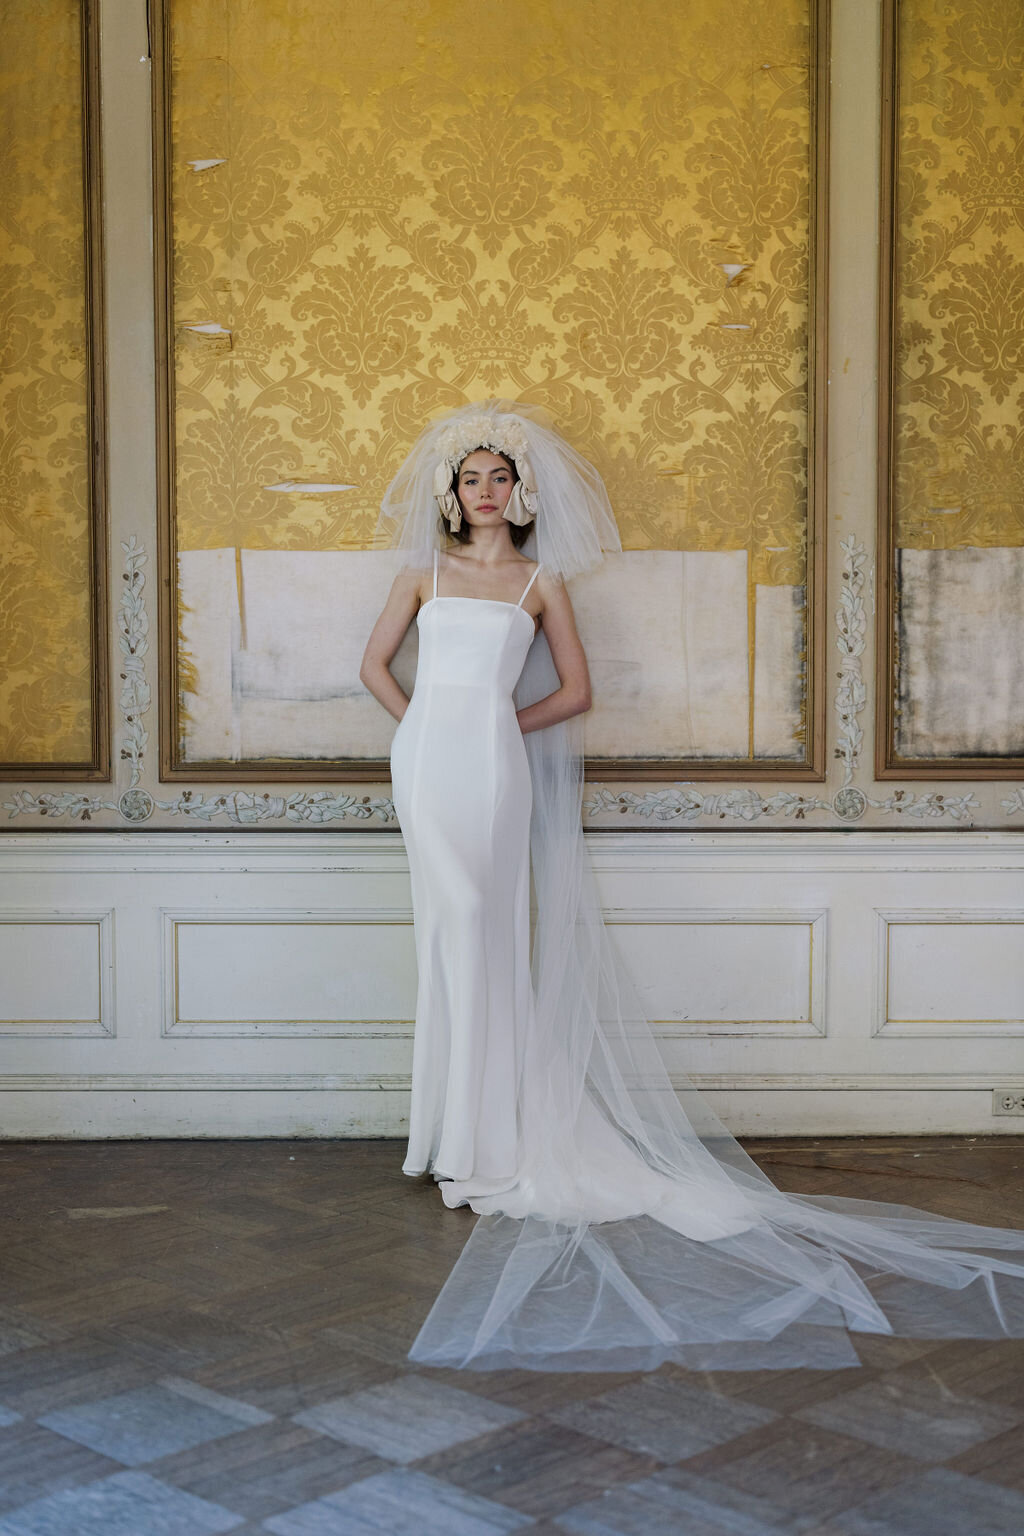 bride wearing wedding dress leaning against wall in yellow room mansion